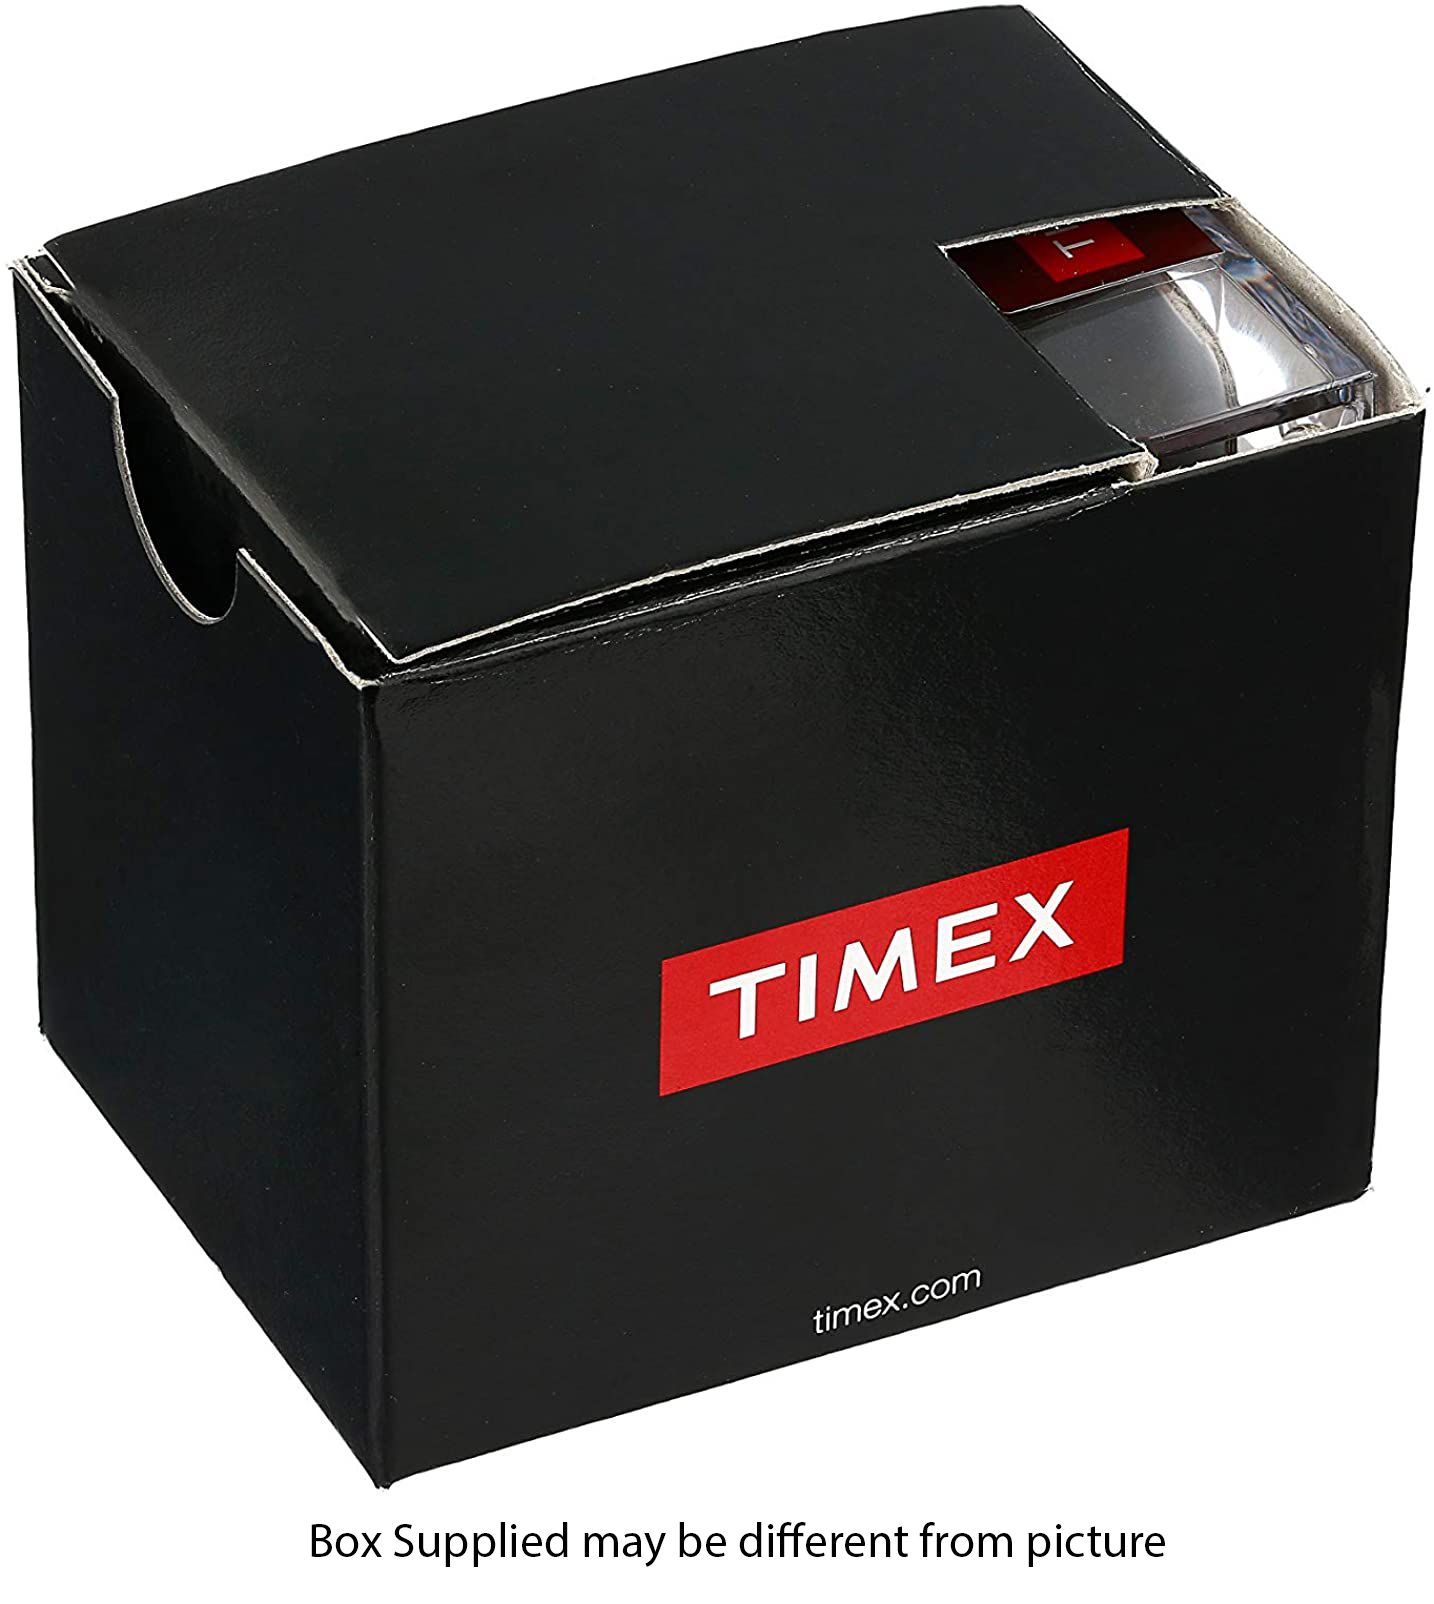 This Timex  Multi Dial Watch for Men is the perfect timepiece to wear or to gift. It's Silver 42 mm Round case combined with the comfortable Silver Stainless steel watch band will ensure you enjoy this stunning timepiece without any compromise. Operated by a high quality Quartz movement and water resistant to 3 bars, your watch will keep ticking. This sporty and clasical watch is perfect for every occasion! -The watch has a calendar function: Day-Date, Luminous Hands High quality 21 cm length and 21 mm width Silver Stainless steel strap with a Fold over clasp Case diameter: 42 mm,case thickness: 9 mm, case colour: Silver and dial colour: White